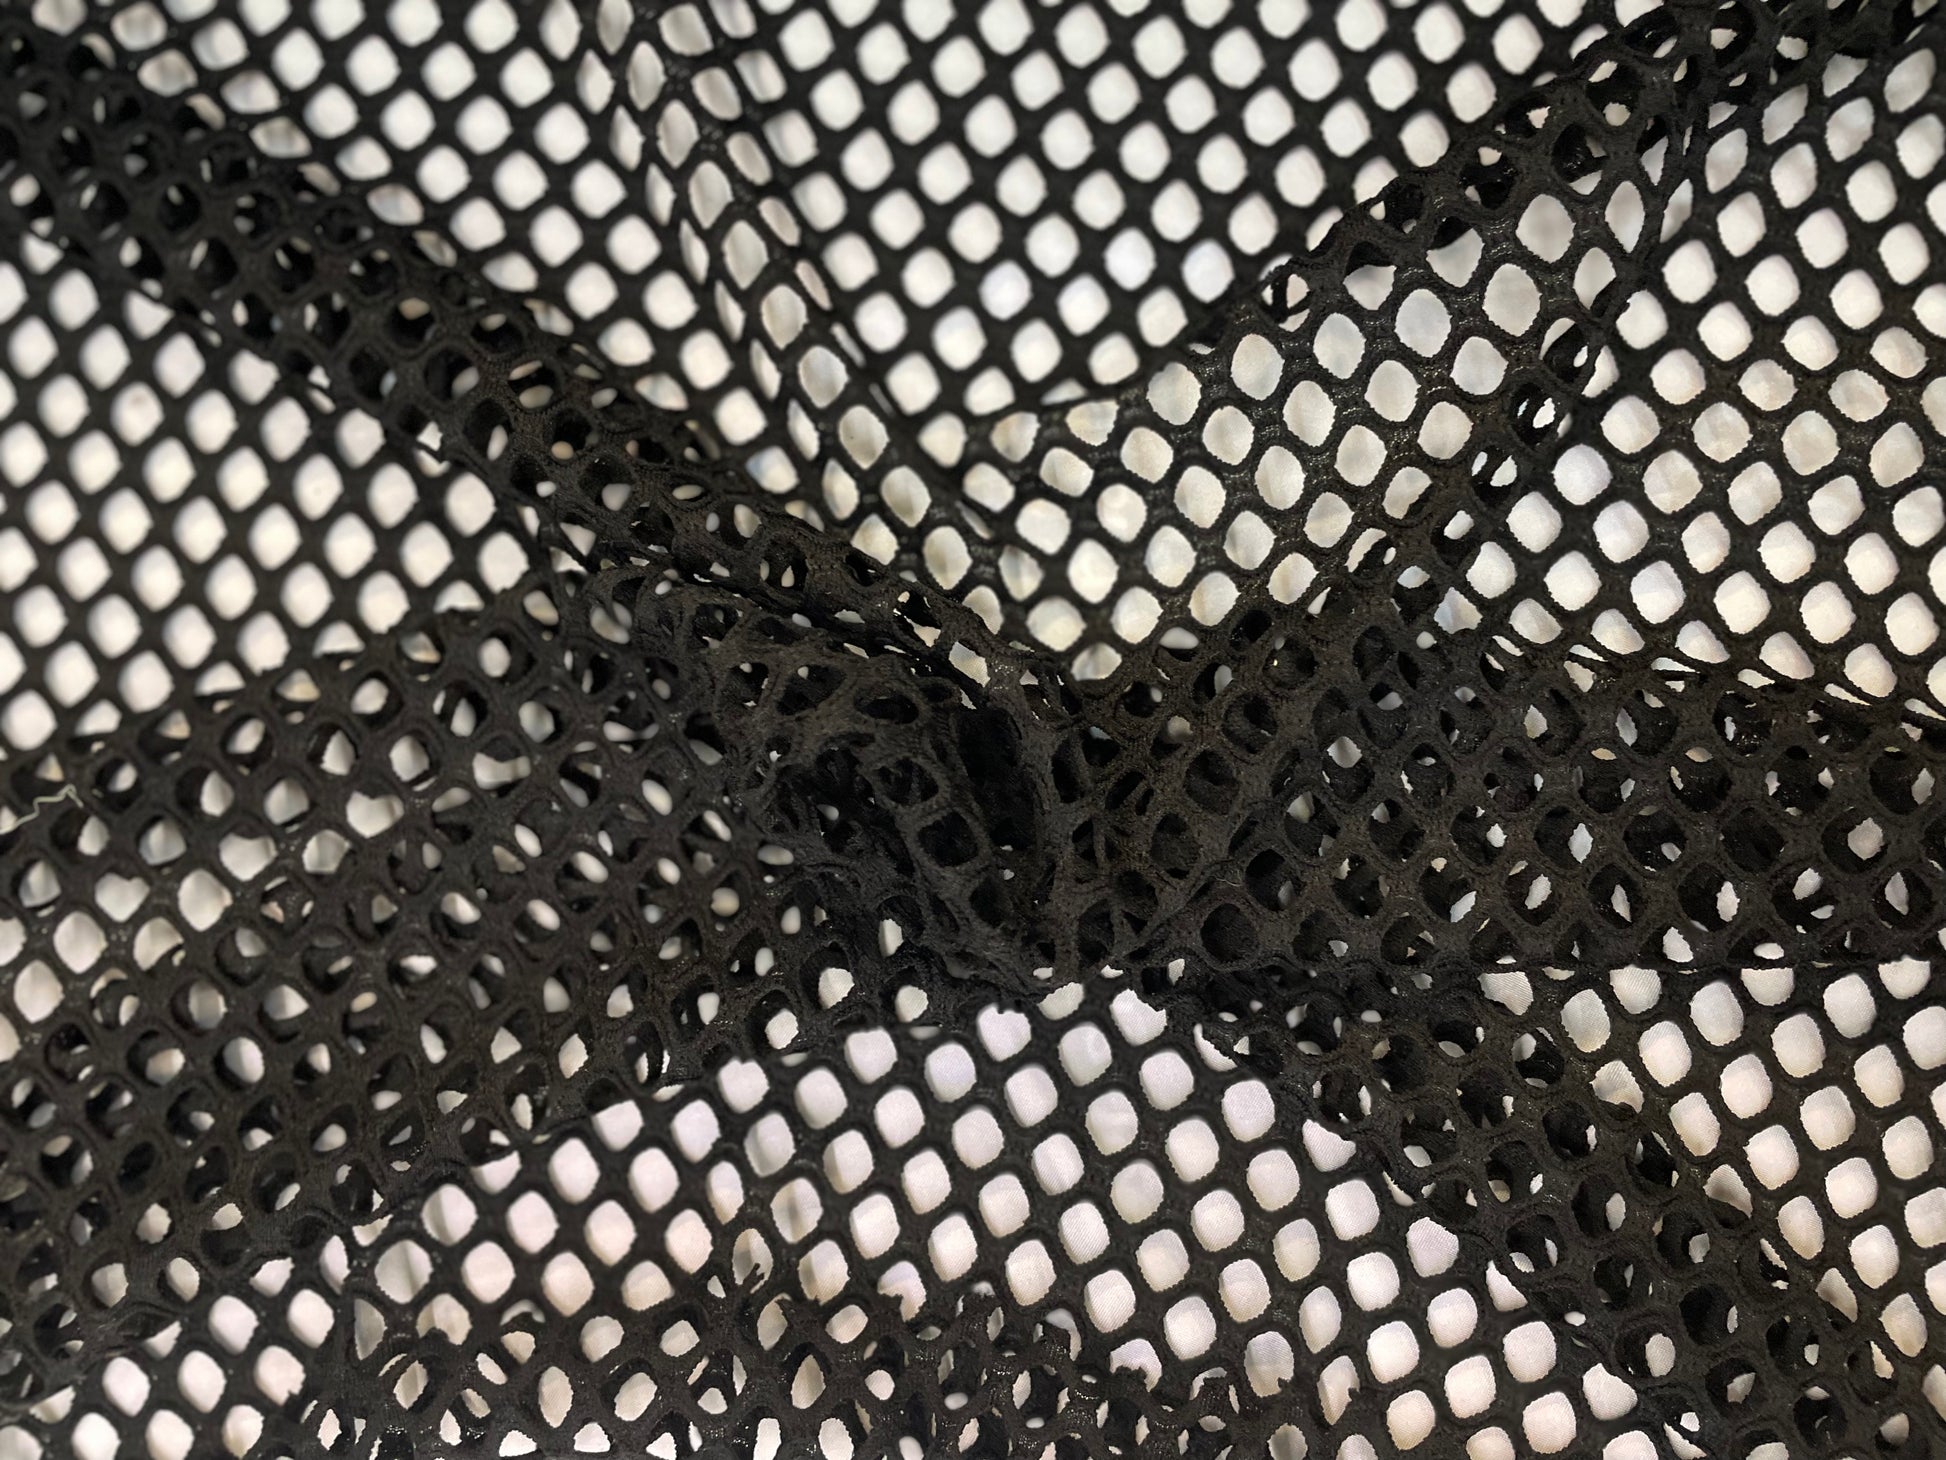 High-elastic Black Fishing Net Fabric for Clothing Making Dress Sewing  Material 175cm Wide - Sold By The Meter